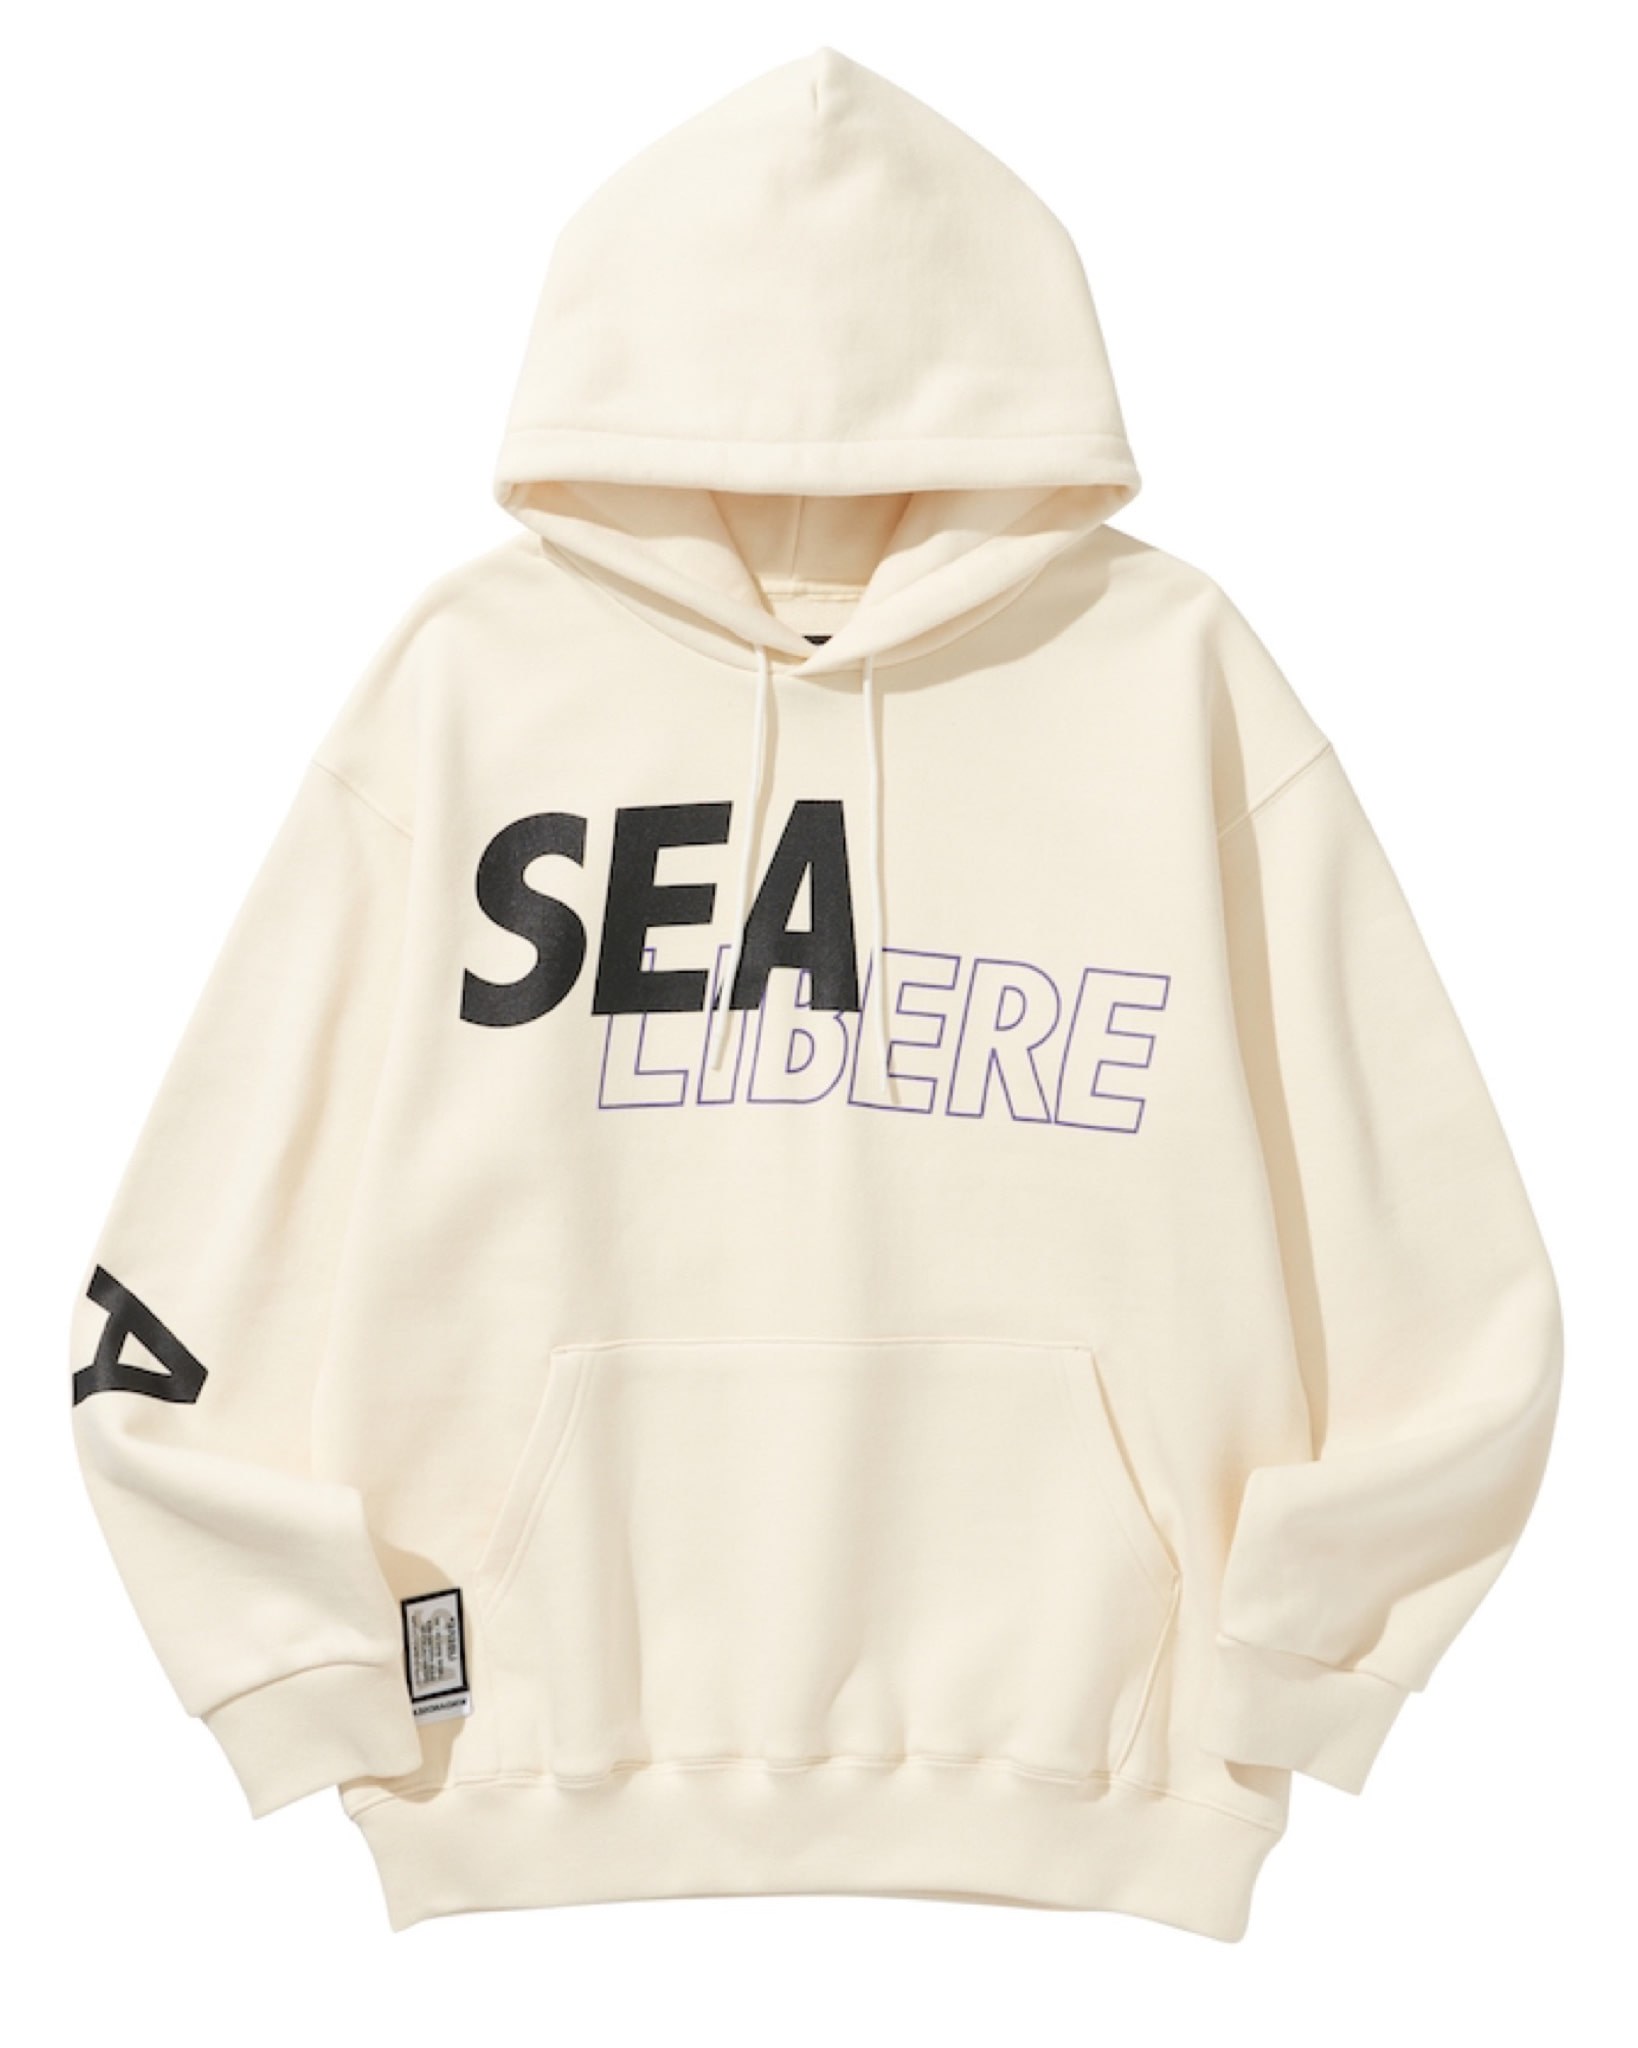 WDS X LIBERE PULLOVER HOODIE / WHITE,BTS,JAPAN,FASHIONBRAND,LIBERE